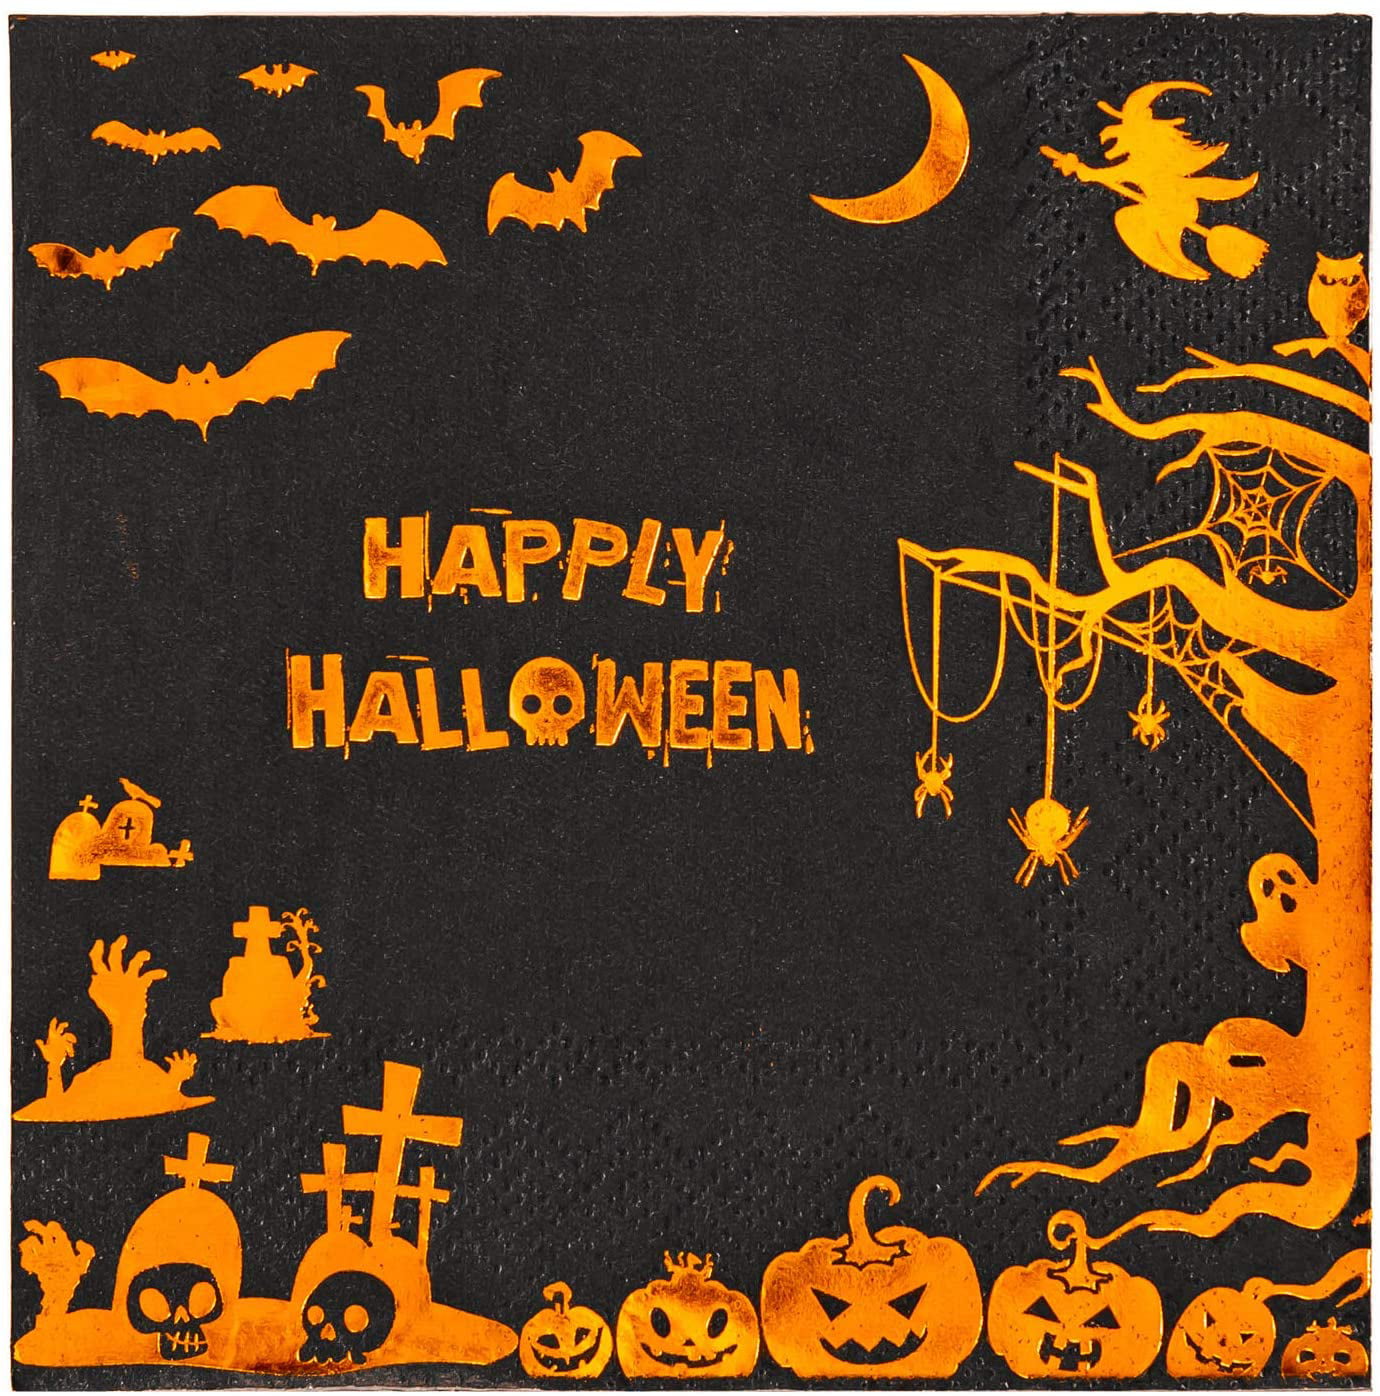 3-Ply Crisky Happy Halloween Disposable Cocktail Napkins for Halloween Dinner Party Decorations Orange Gold Foil 50 Pcs 